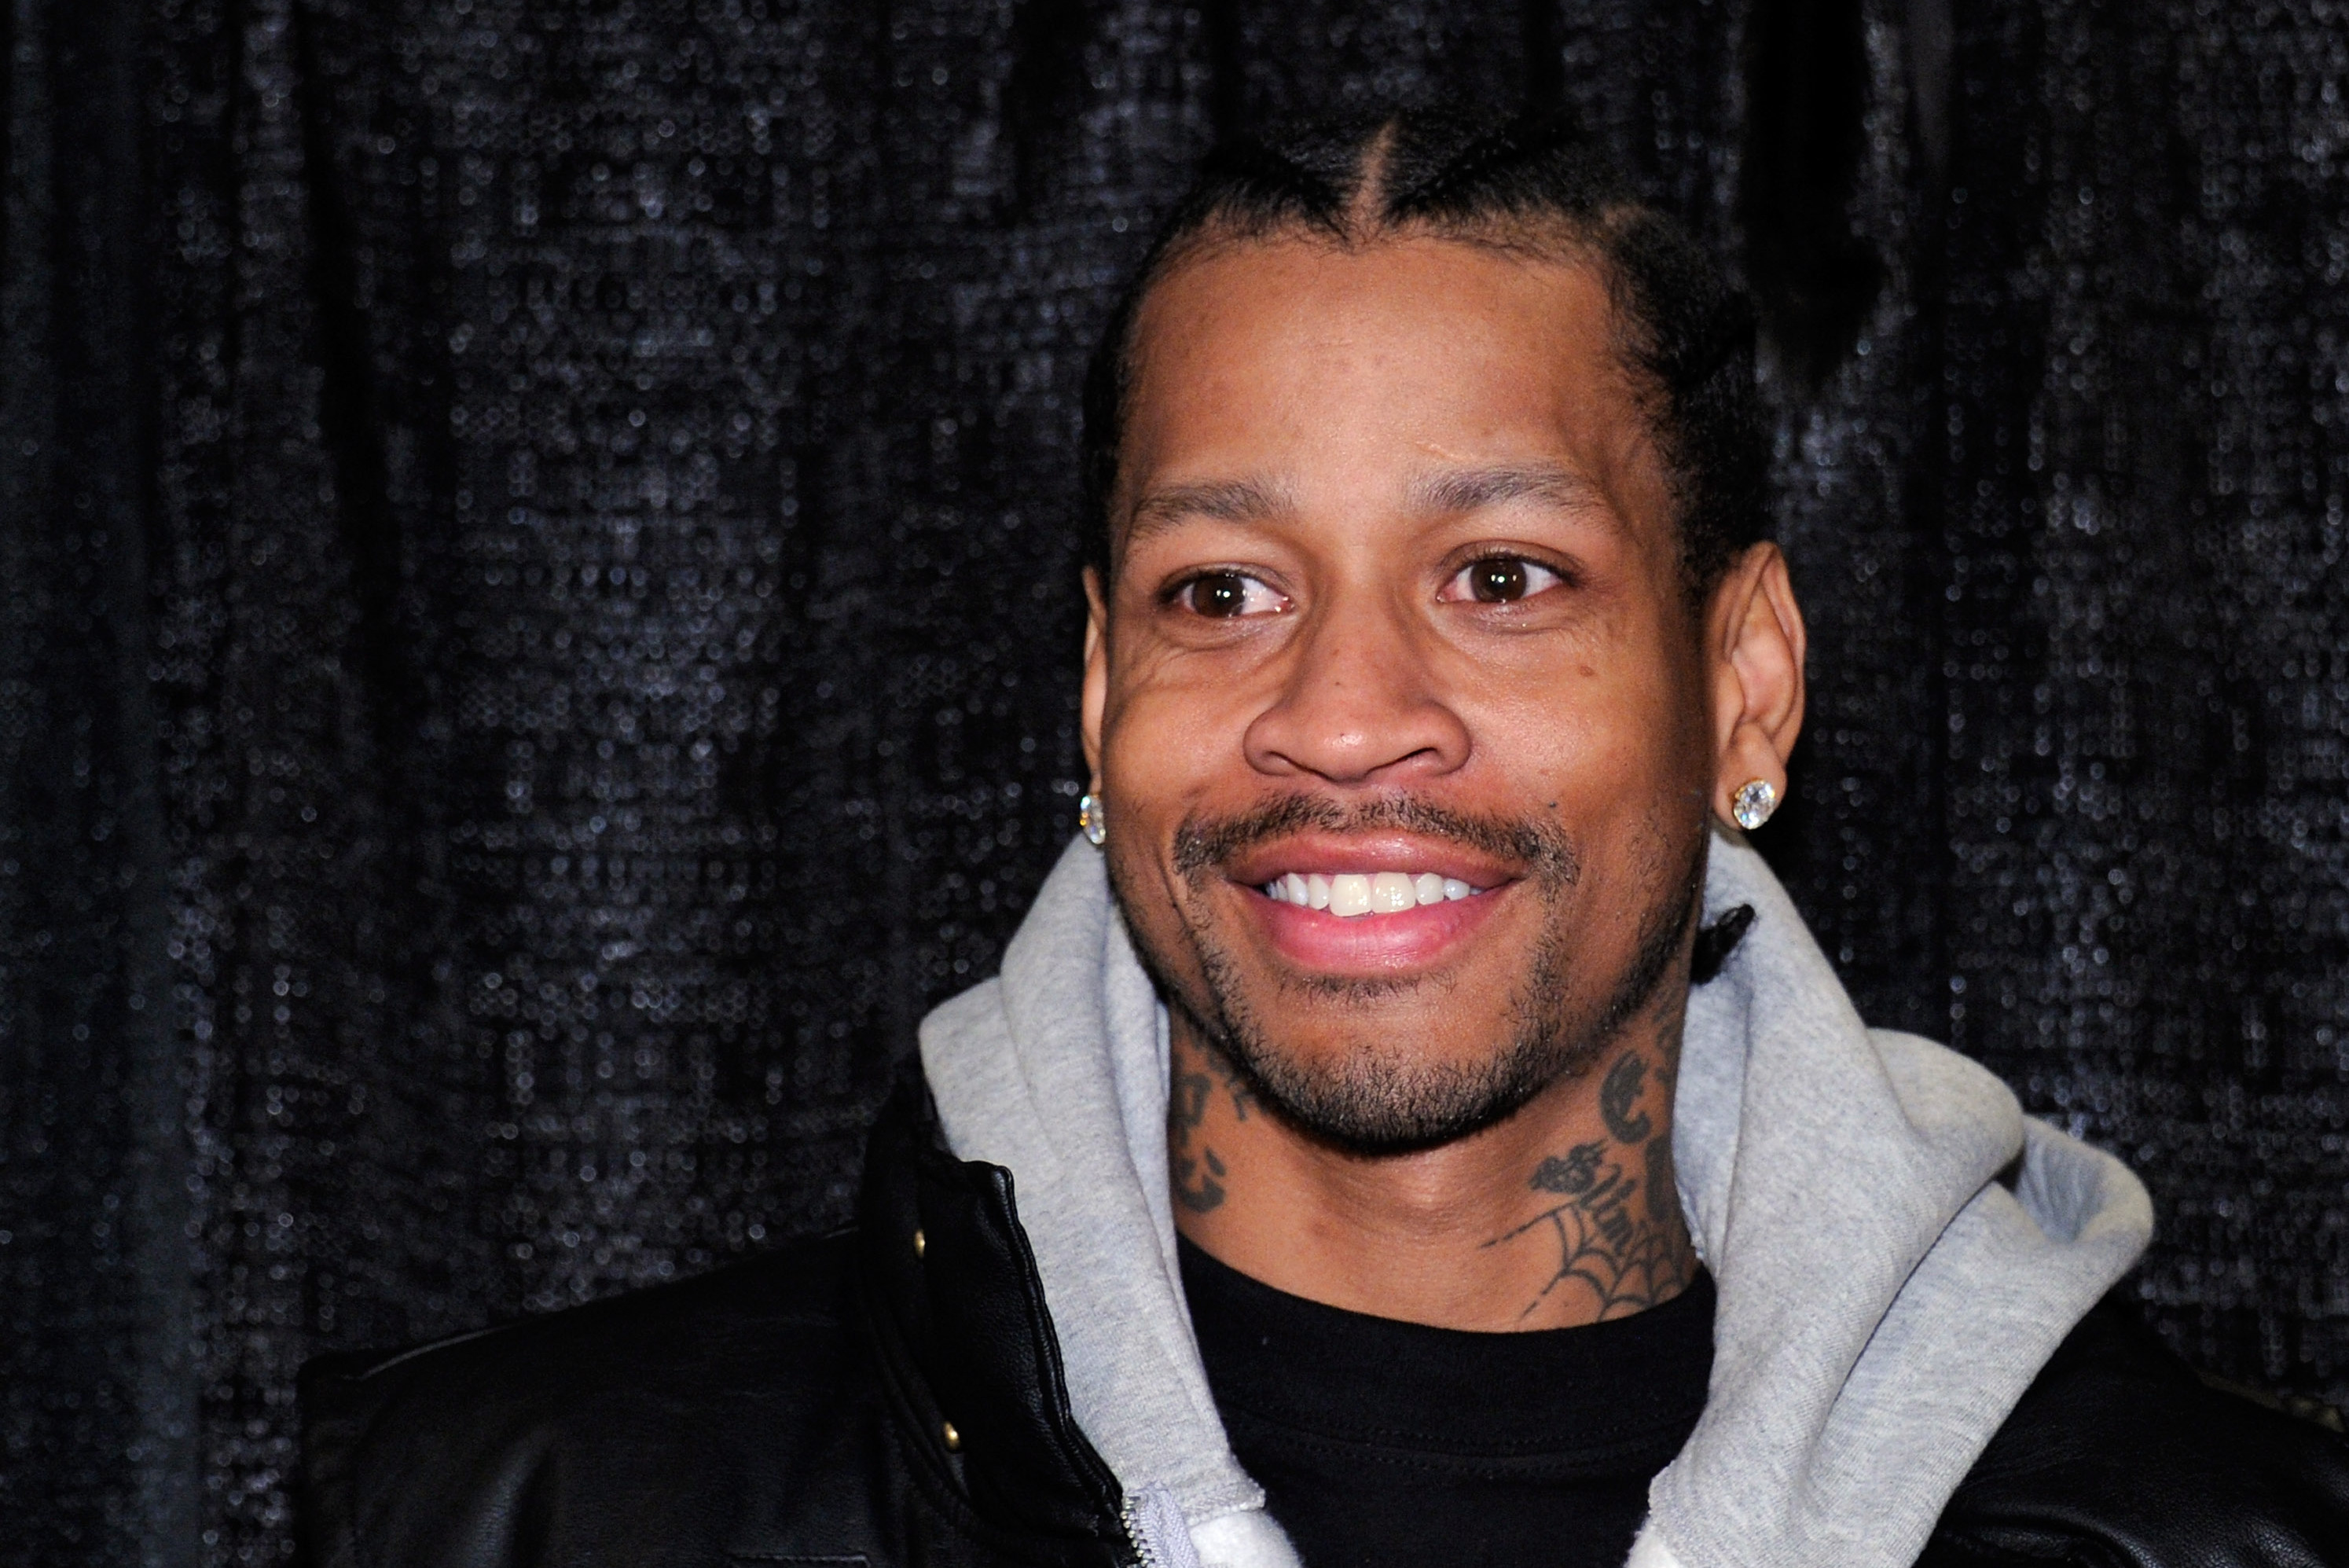 WHY SIXERS FANS LOVED ALLEN IVERSON, AND FEELING WAS MUTUAL